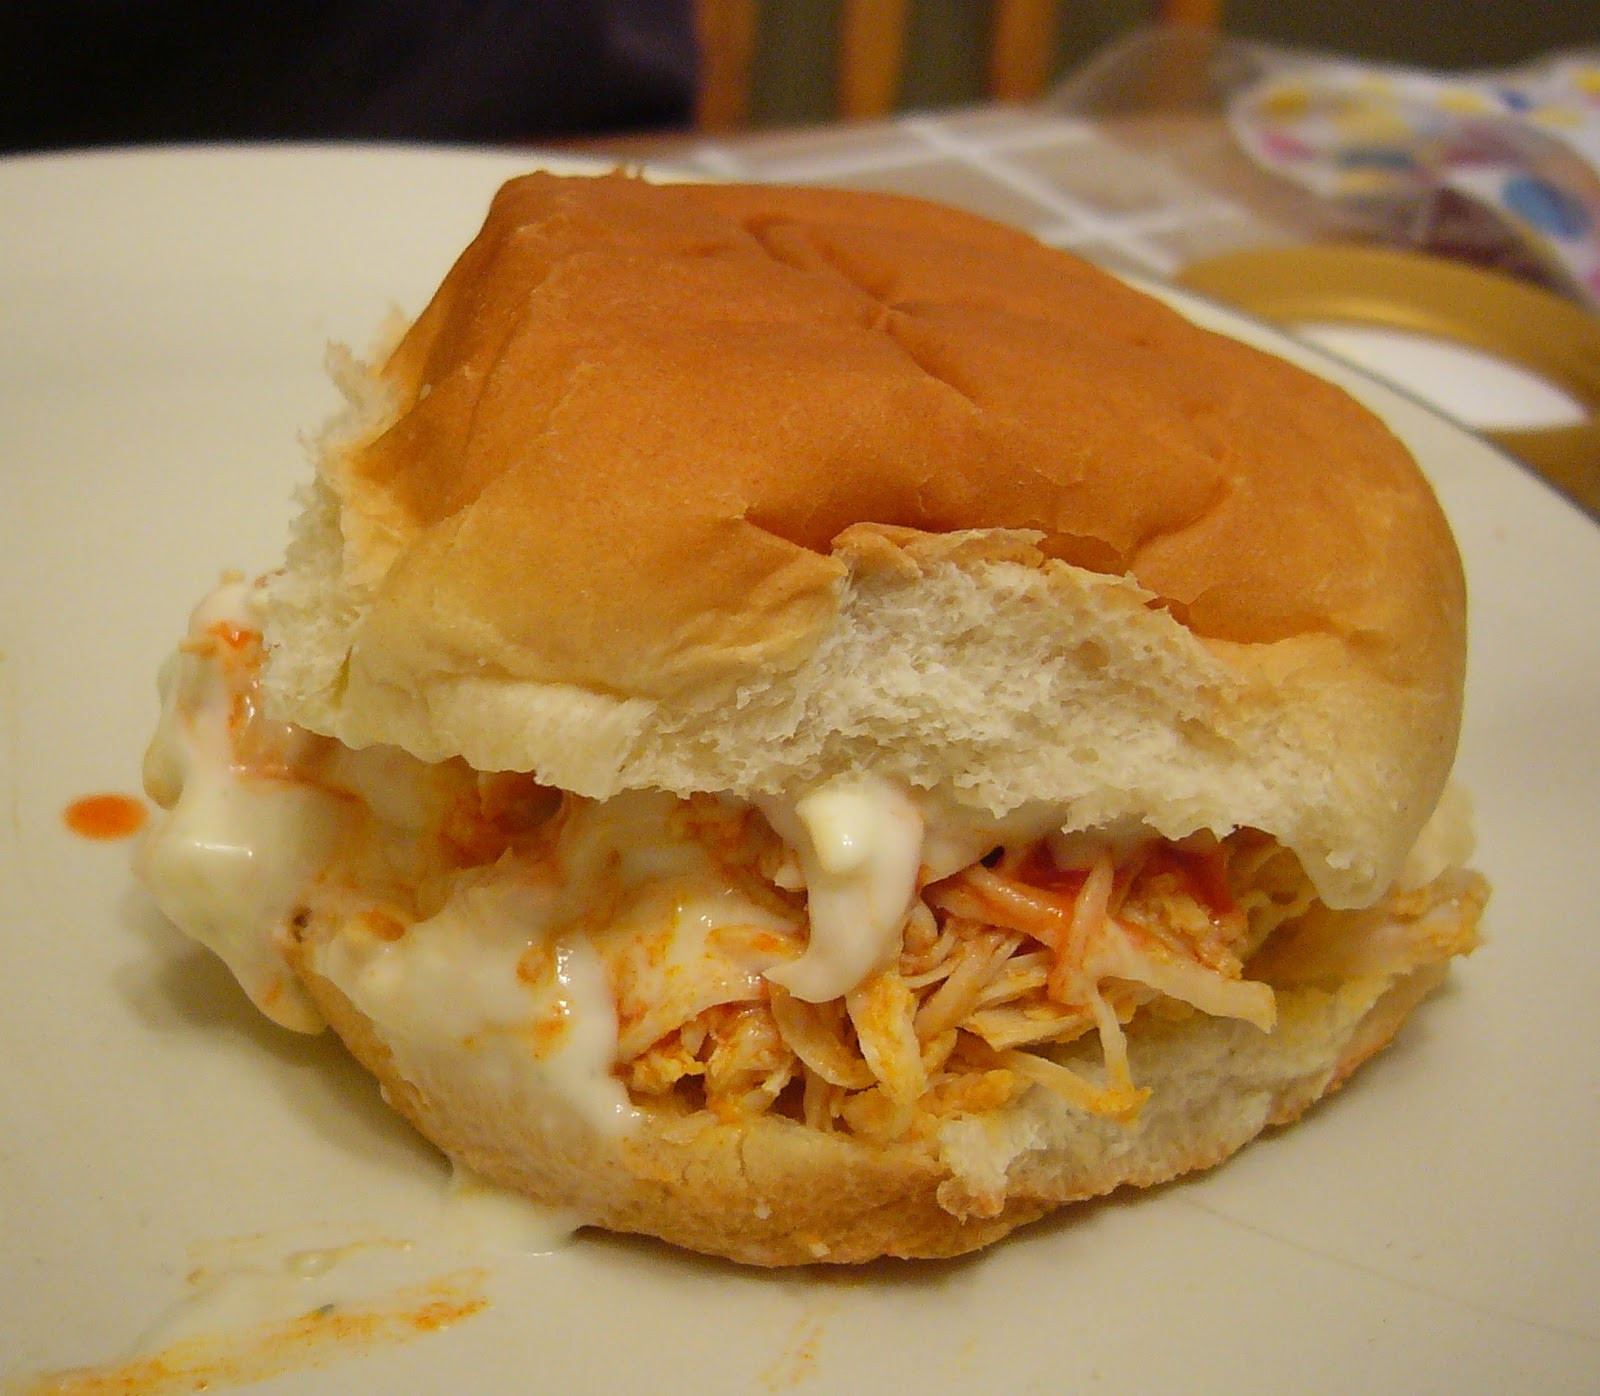 Shredded Chicken Sandwiches
 Bringing Home the Brakebush Spicy Shredded Chicken Sandwiches